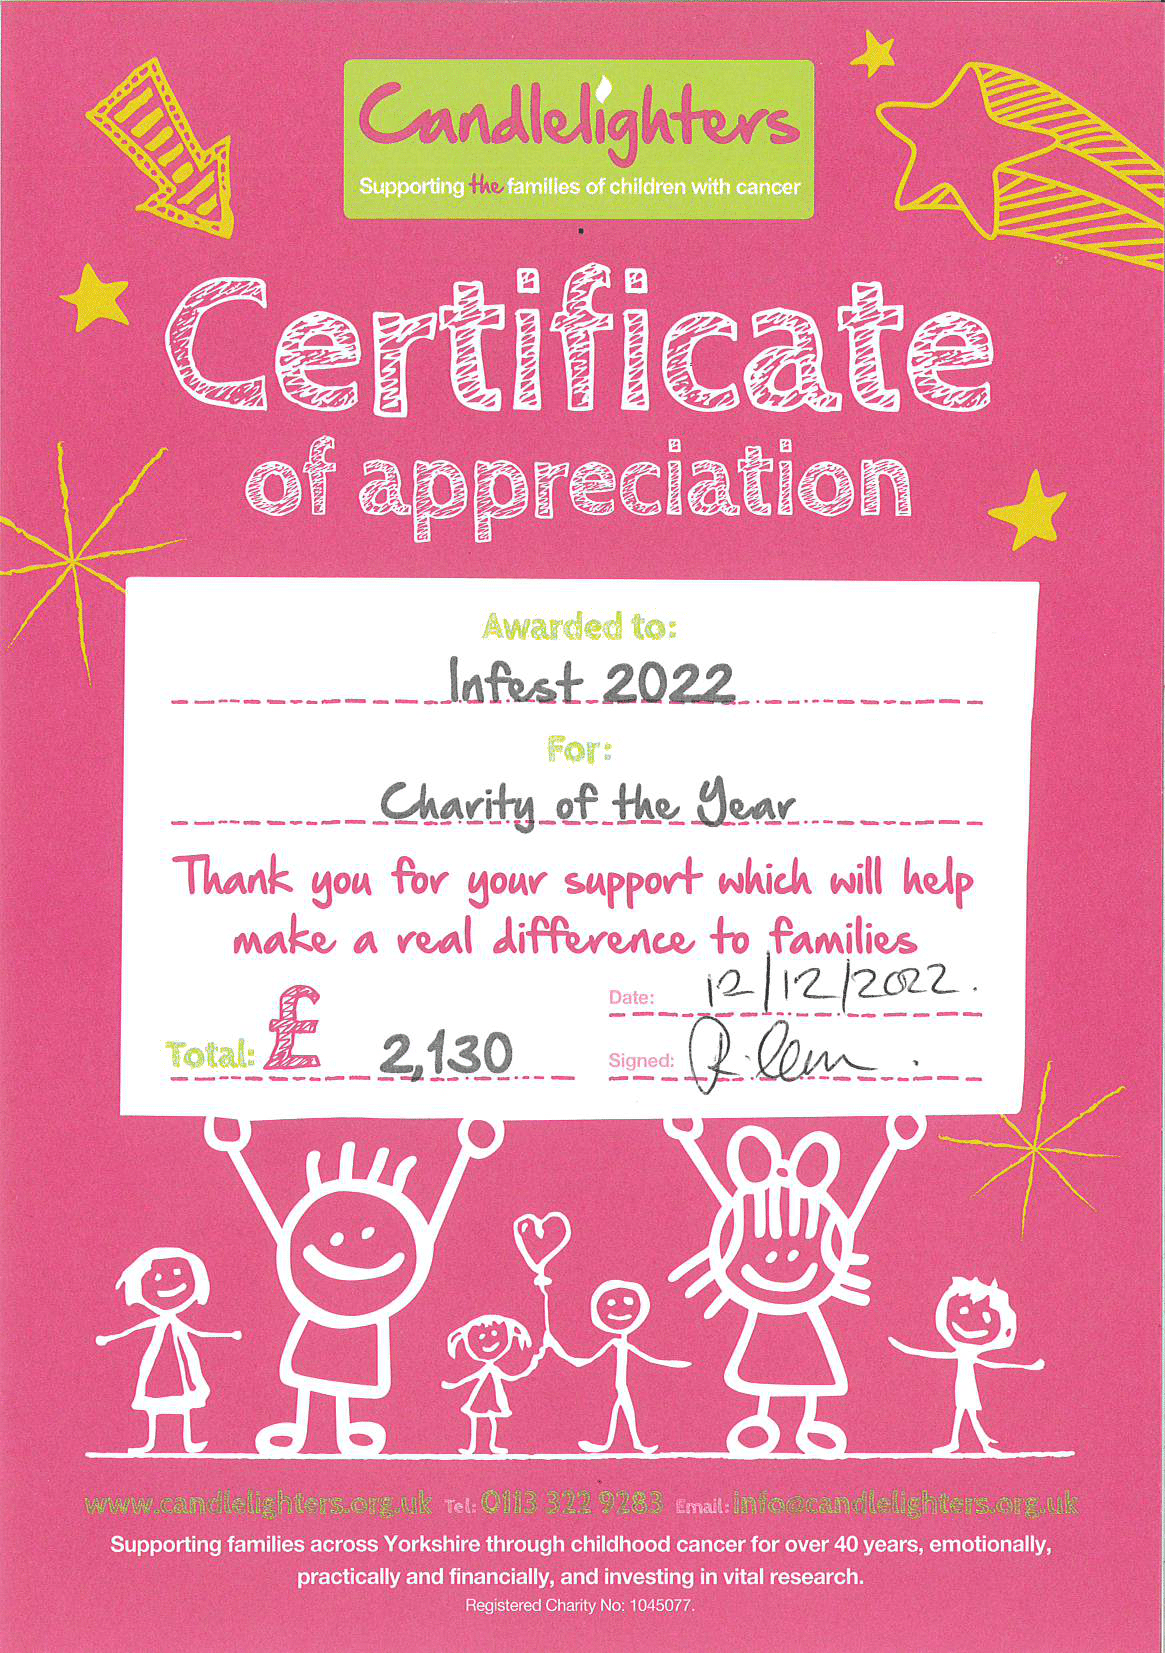 Candlelighters Charity Certificate for Infest 2022